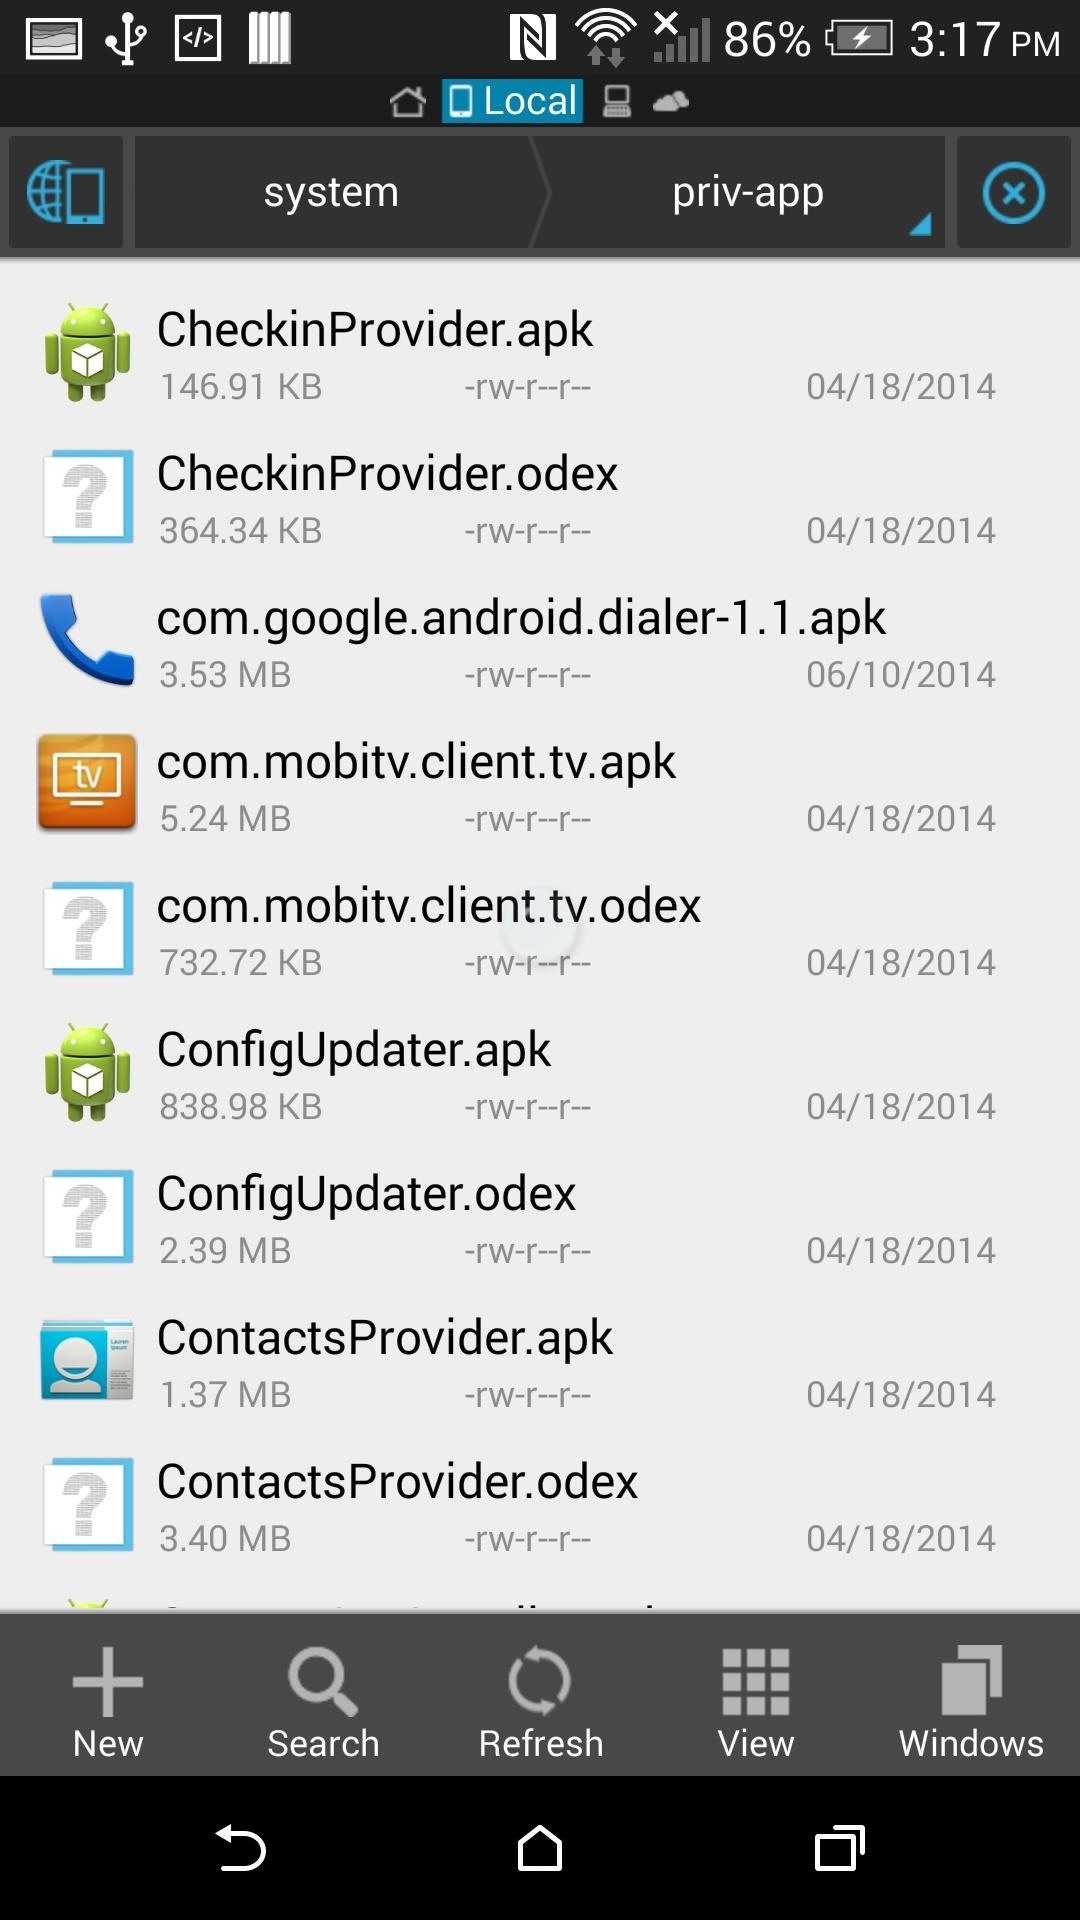 How to Install the New KitKat 4.4.3 Dialer on Your HTC One